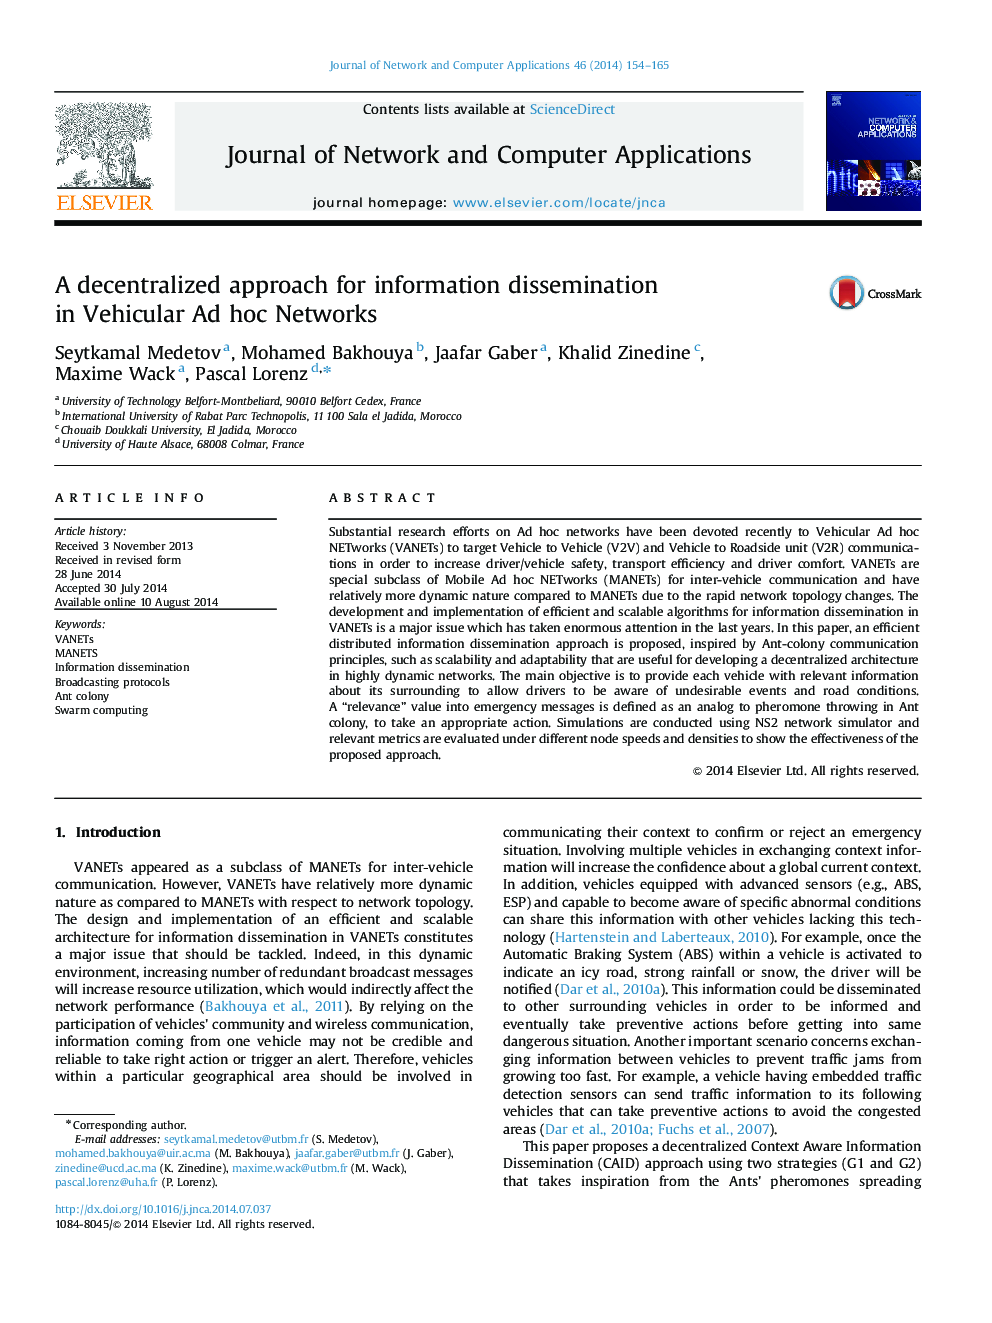 A decentralized approach for information dissemination in Vehicular Ad hoc Networks